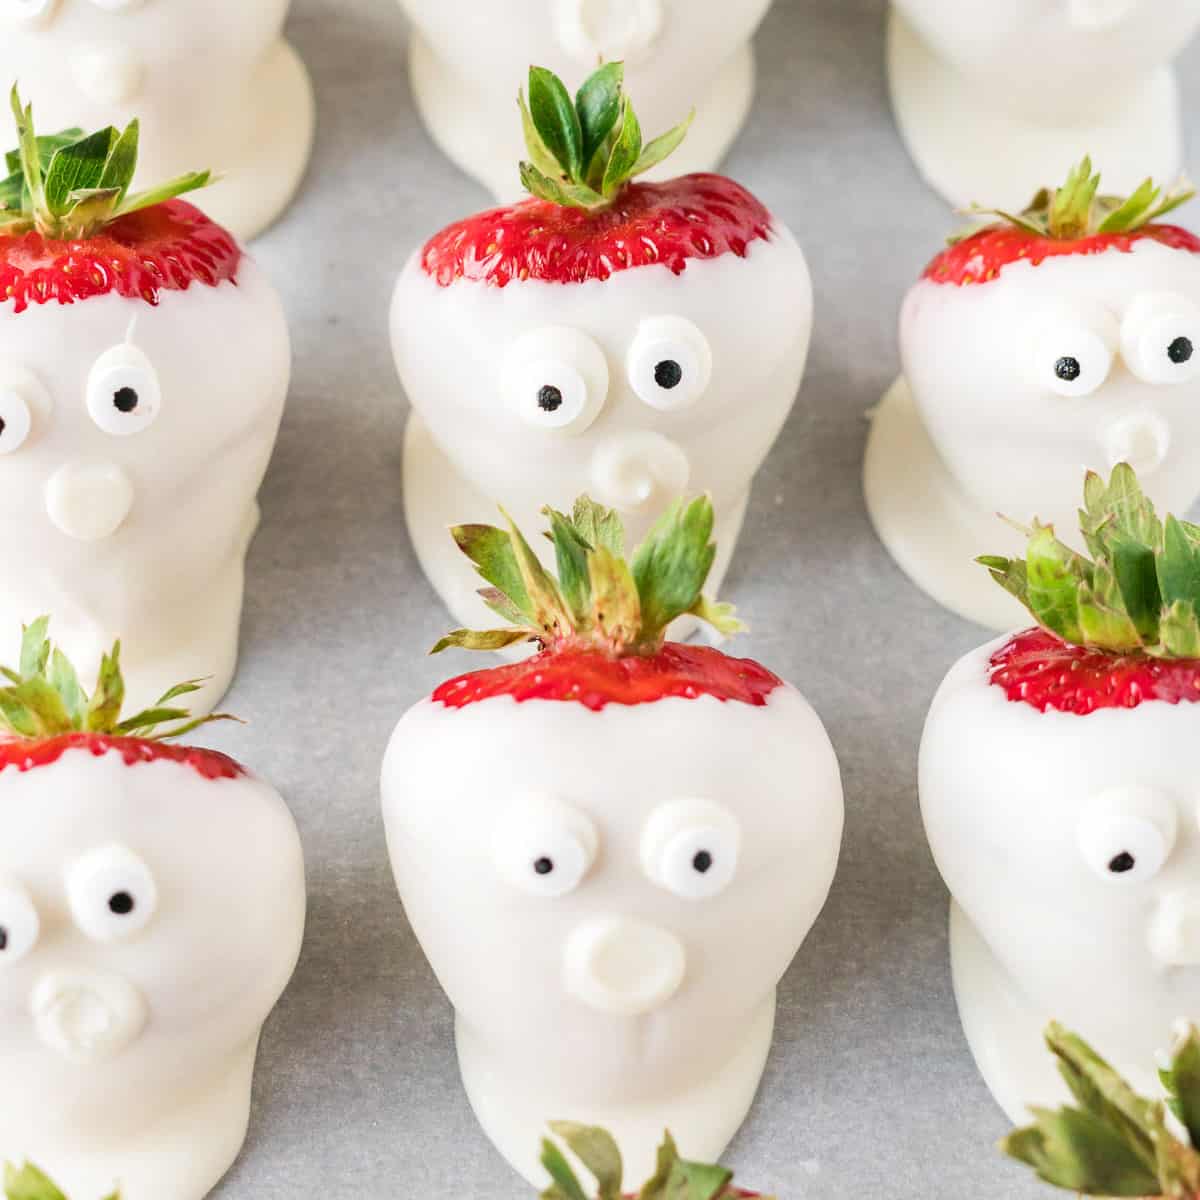 chocolate dipped strawberry ghosts for halloween